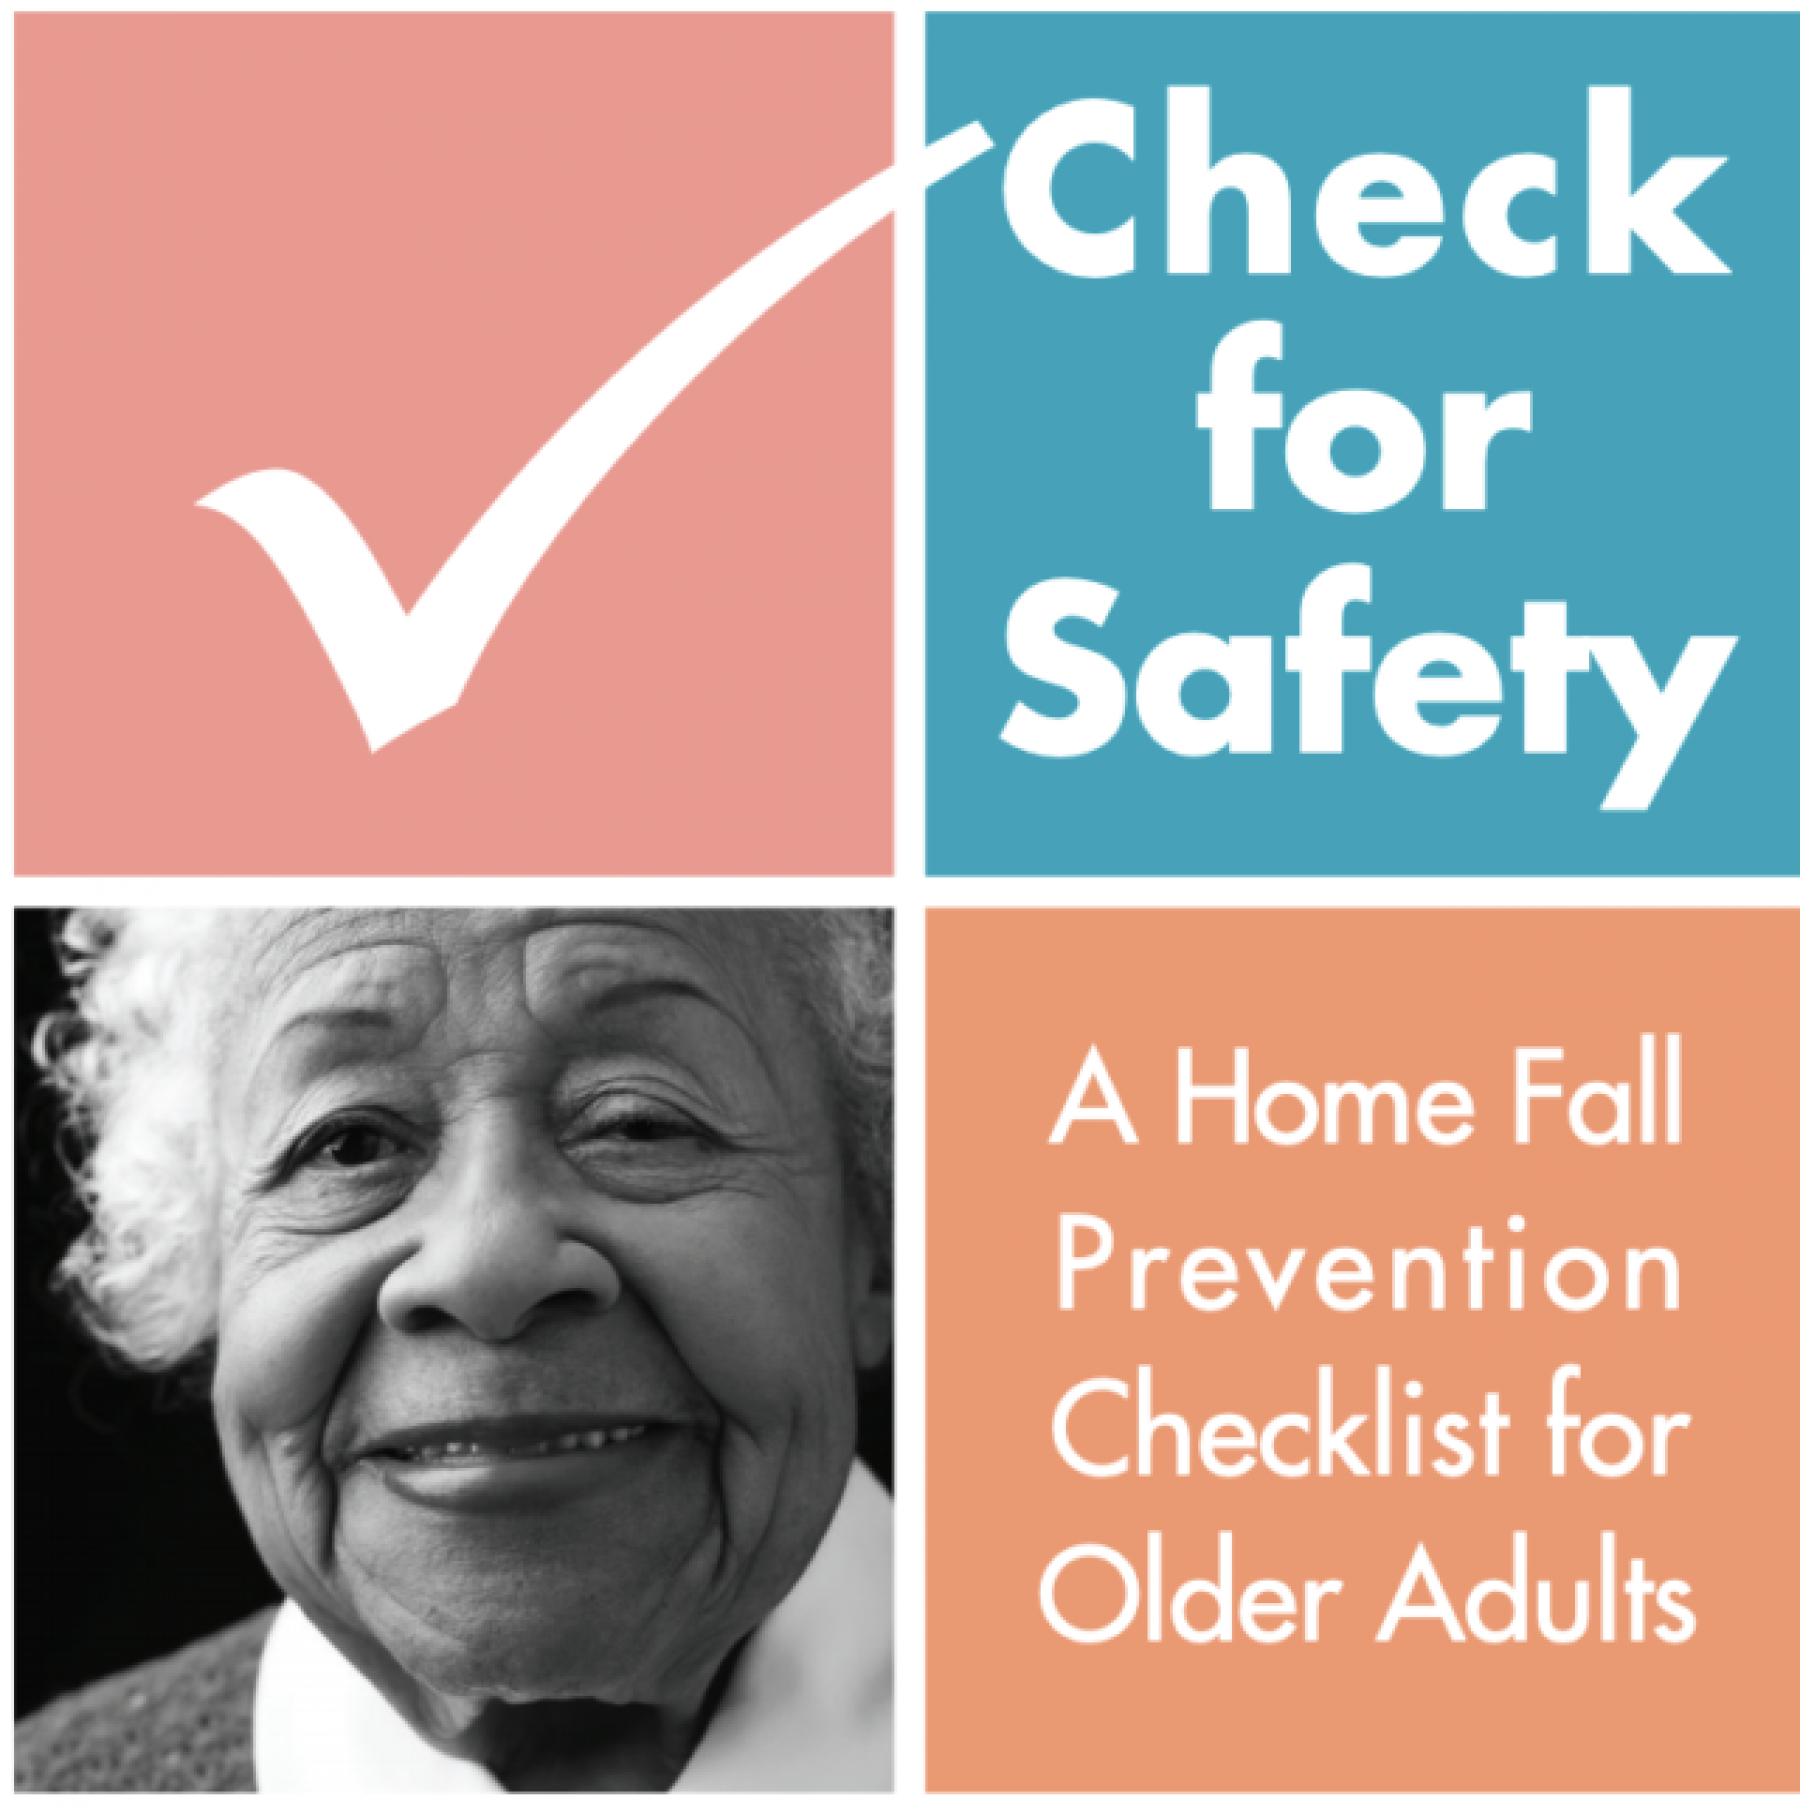 Check for Safety: A Home Fall Prevention Checklist for Older Adults